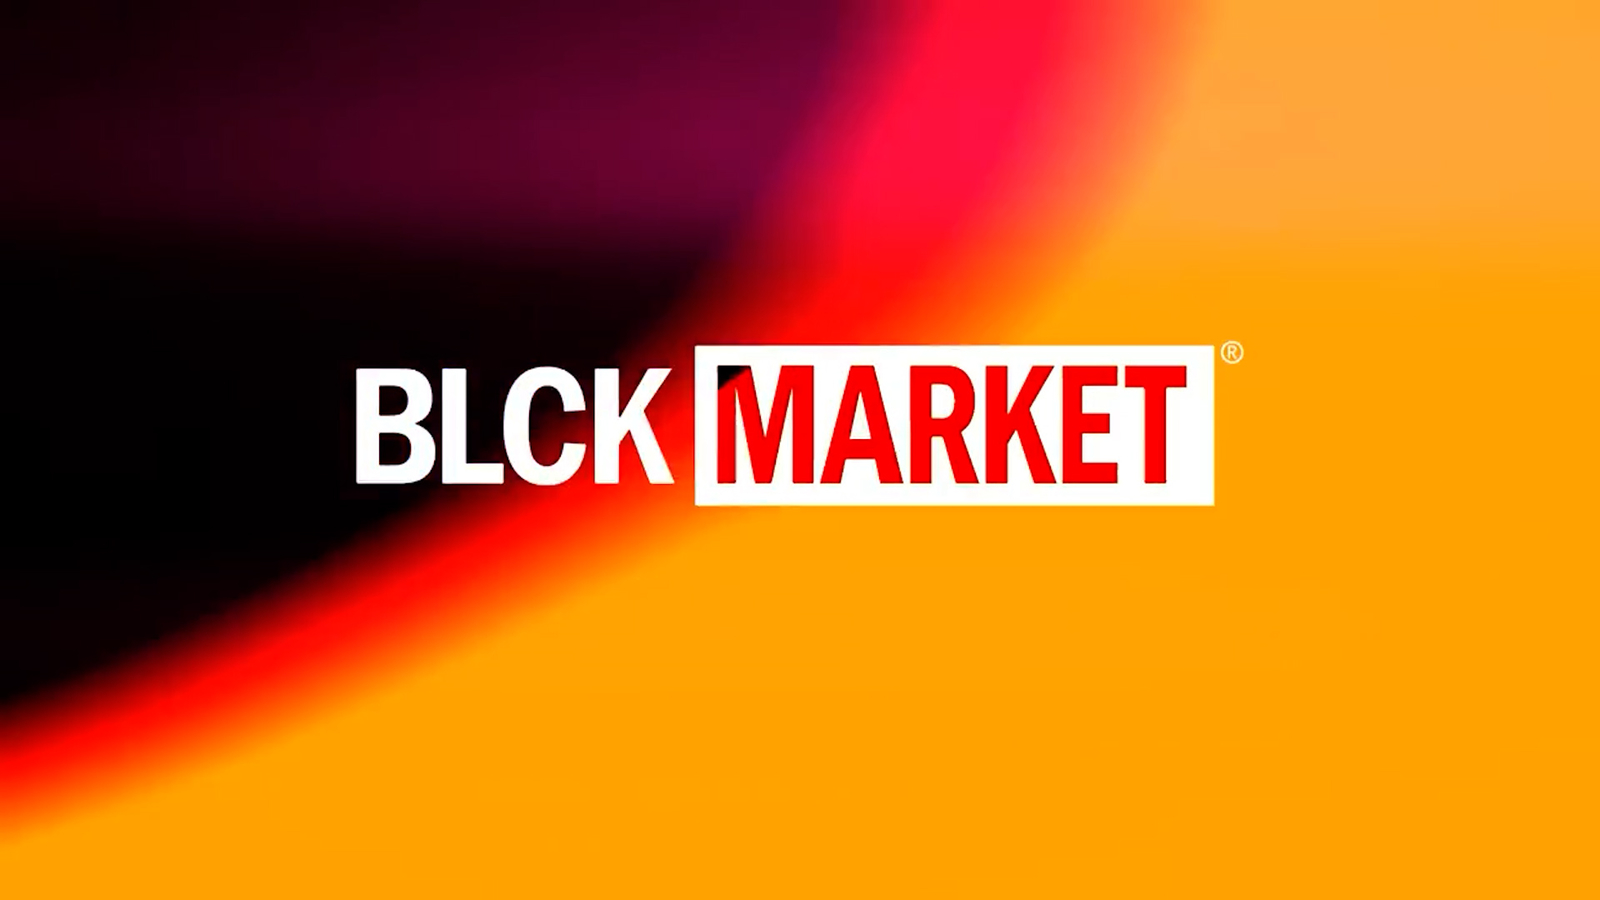 BLCK Market in Pearland offers platform to small black businesses and entrepreneurs [Video]